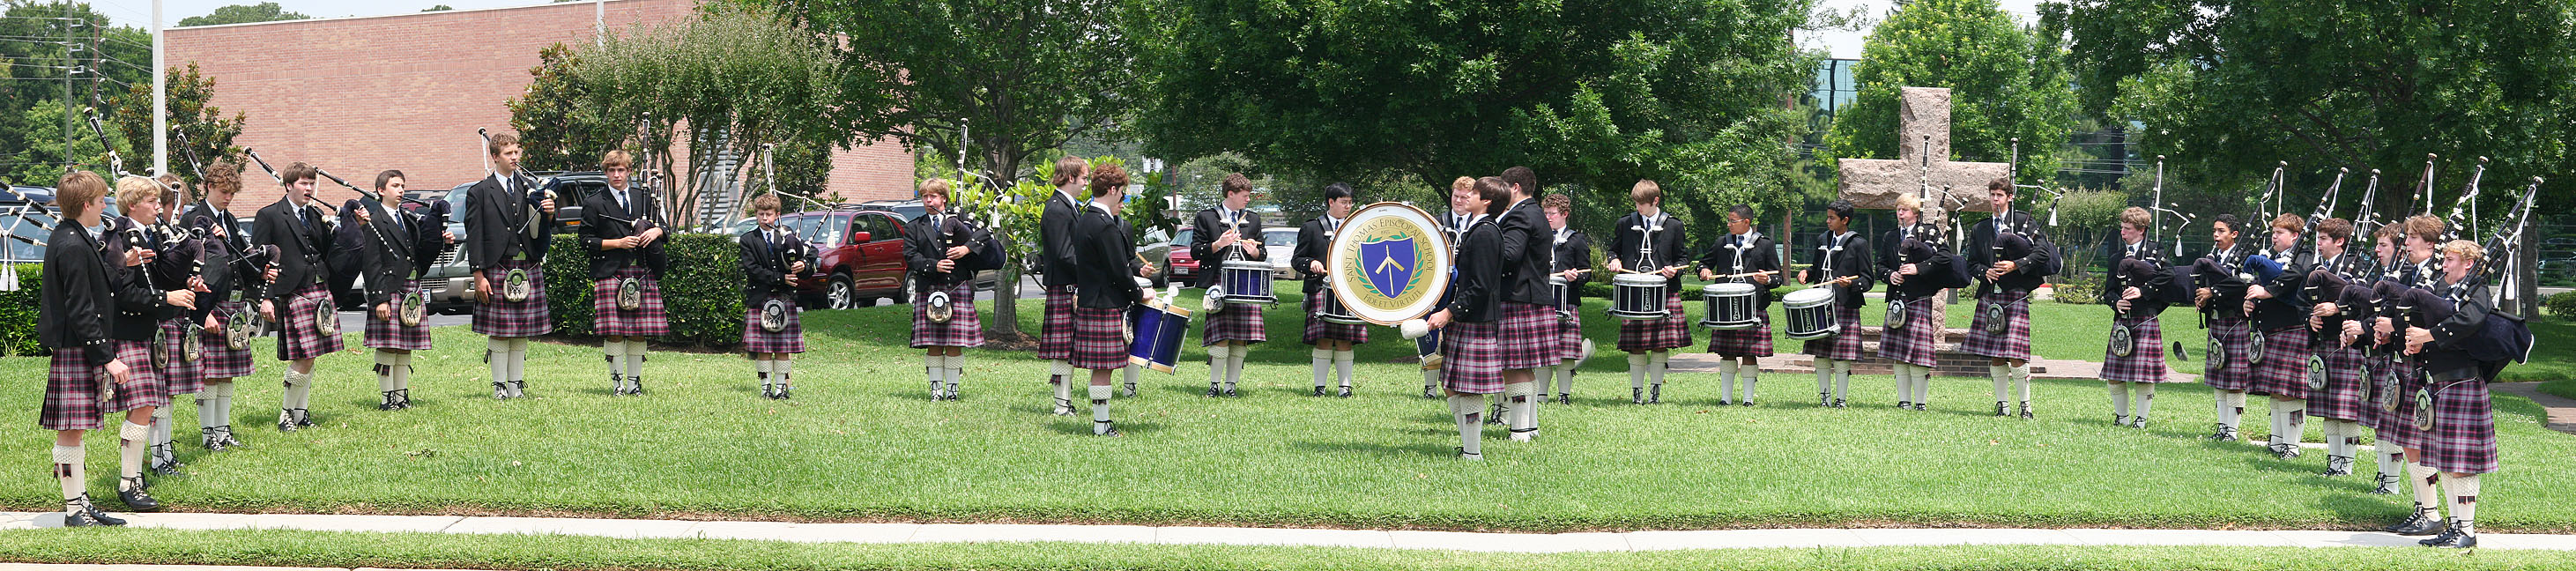 The St. Thomas Episcopal School Pipe Band.